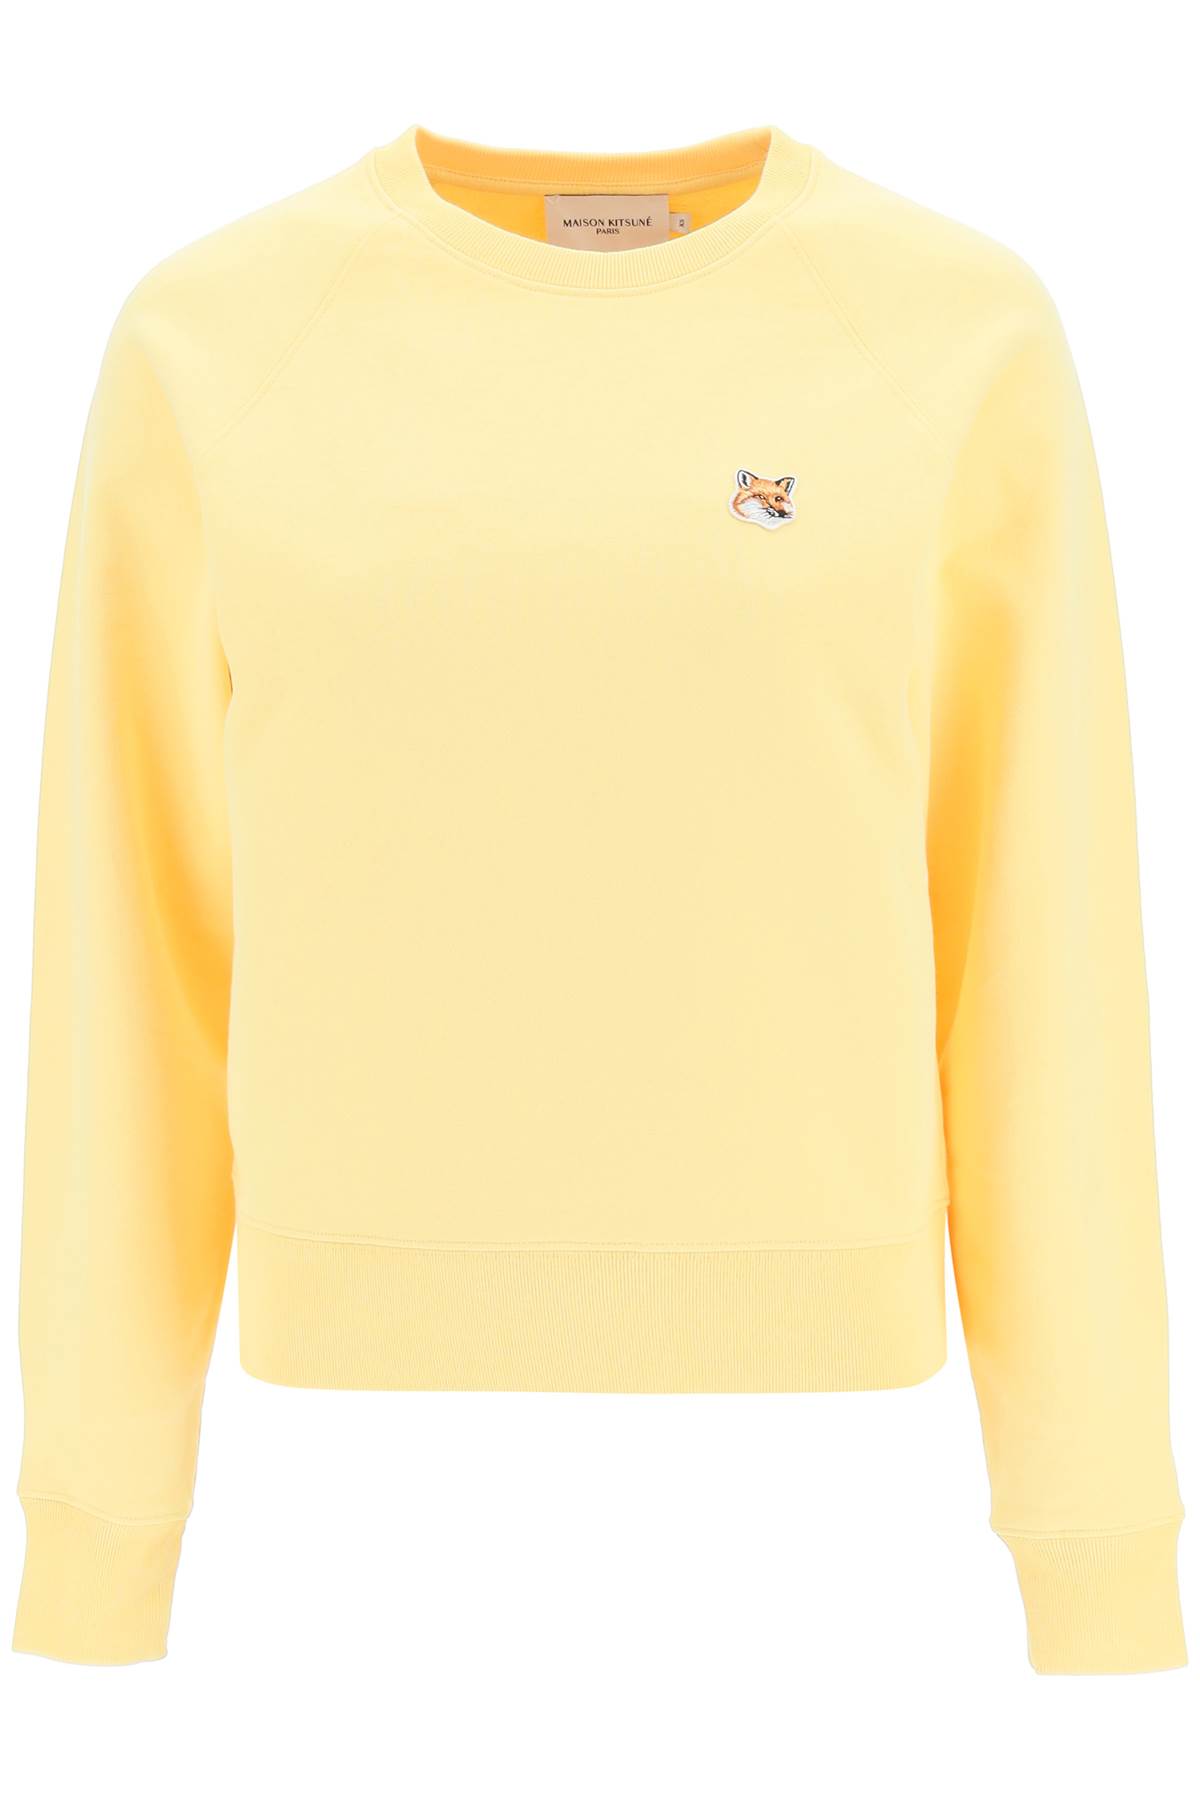 MAISON KITSUNÉ CREW-NECK SWEATSHIRT WITH EMBROIDERED PATCH